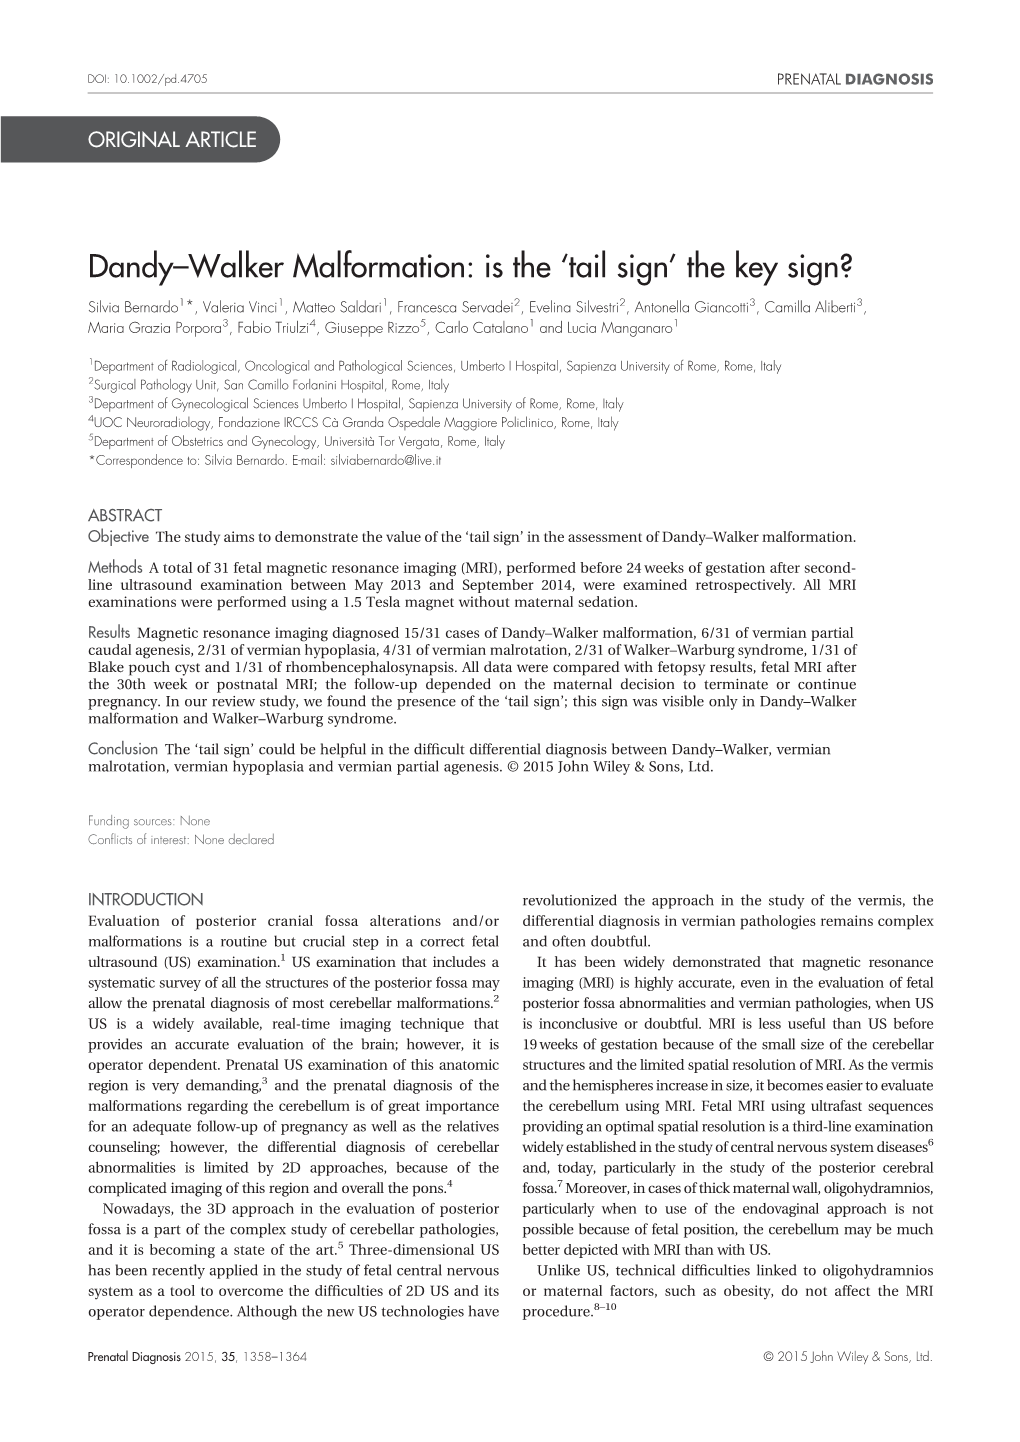 Dandy–Walker Malformation: Is the 'Tail Sign'